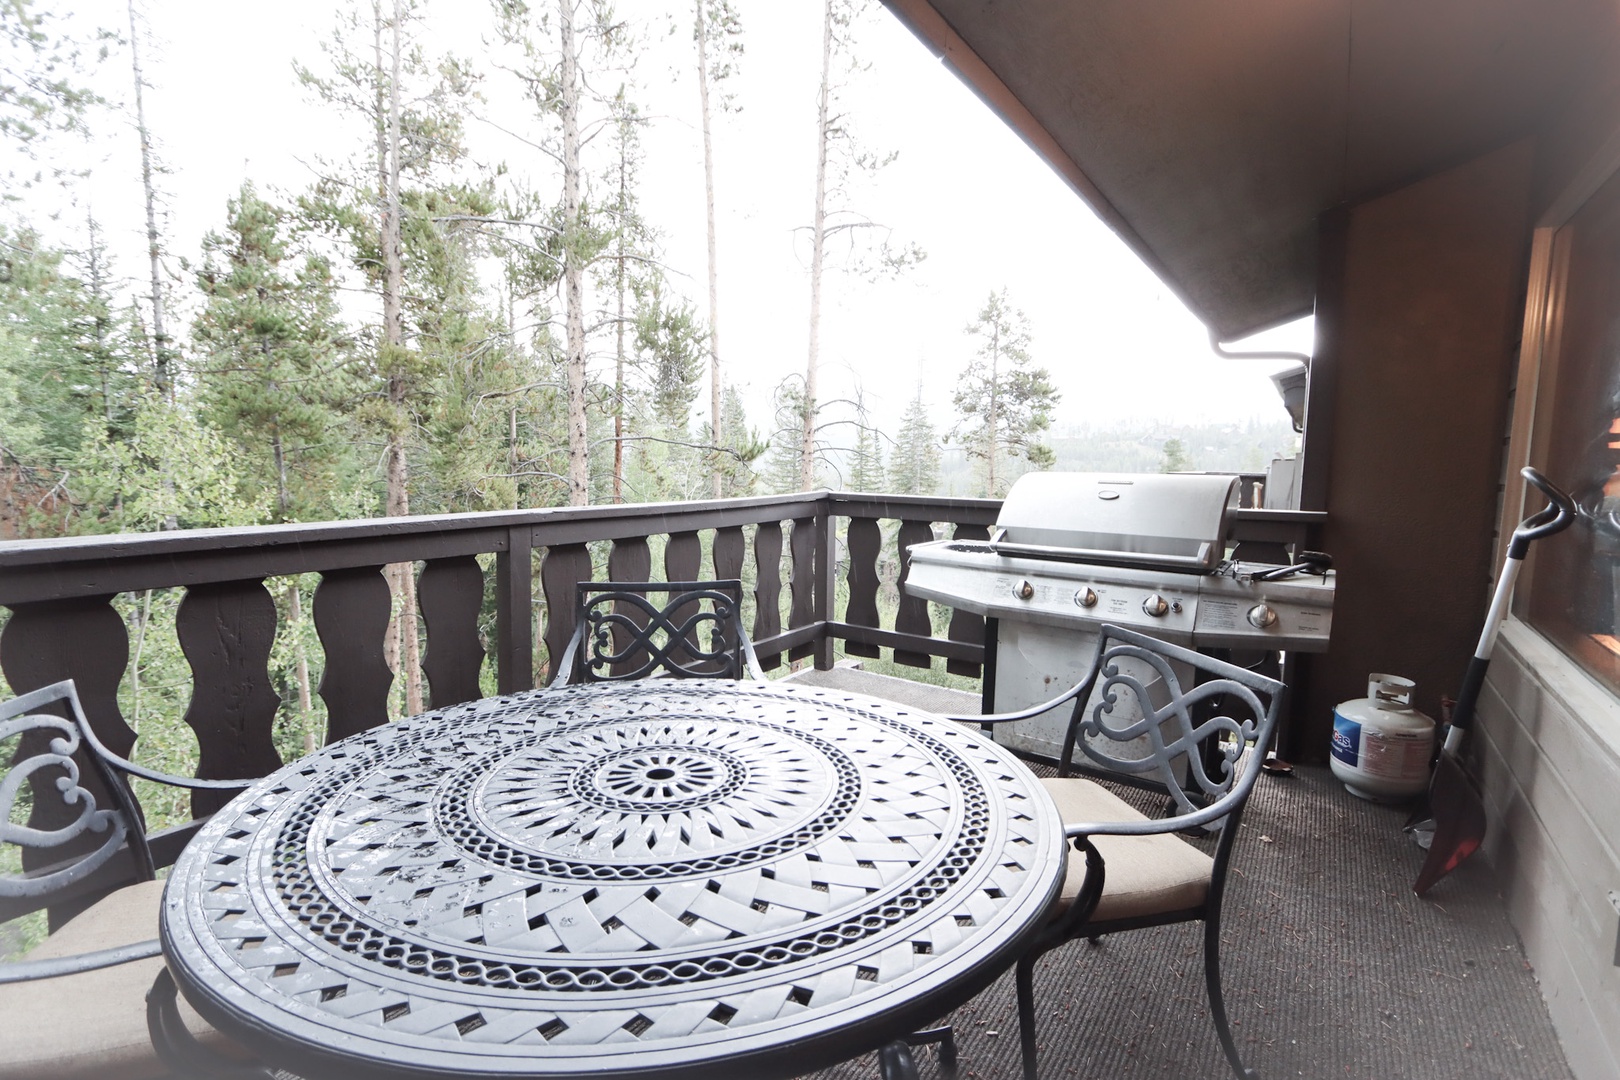 Dine al fresco or relax on the balcony while you grill up a feast!